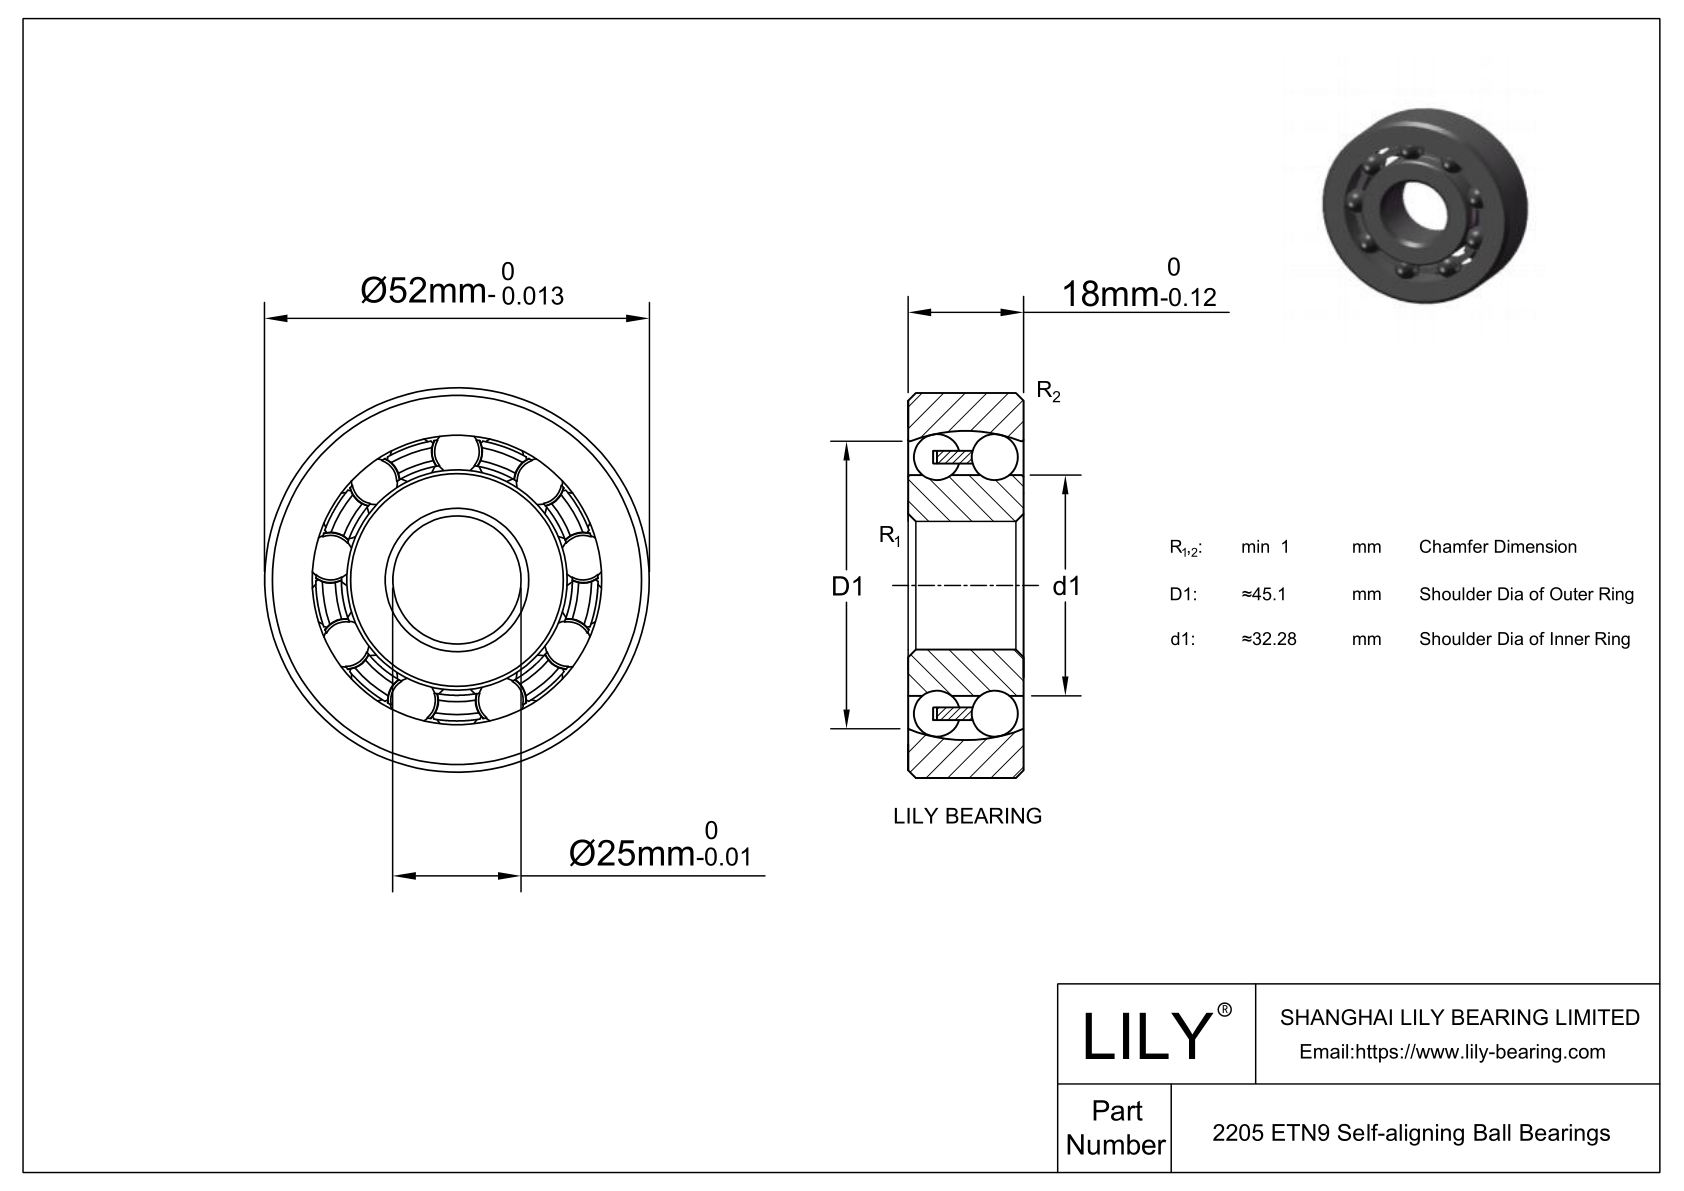 S2205 ETN9 Stainless Steel Self Aligning Ball Bearings cad drawing